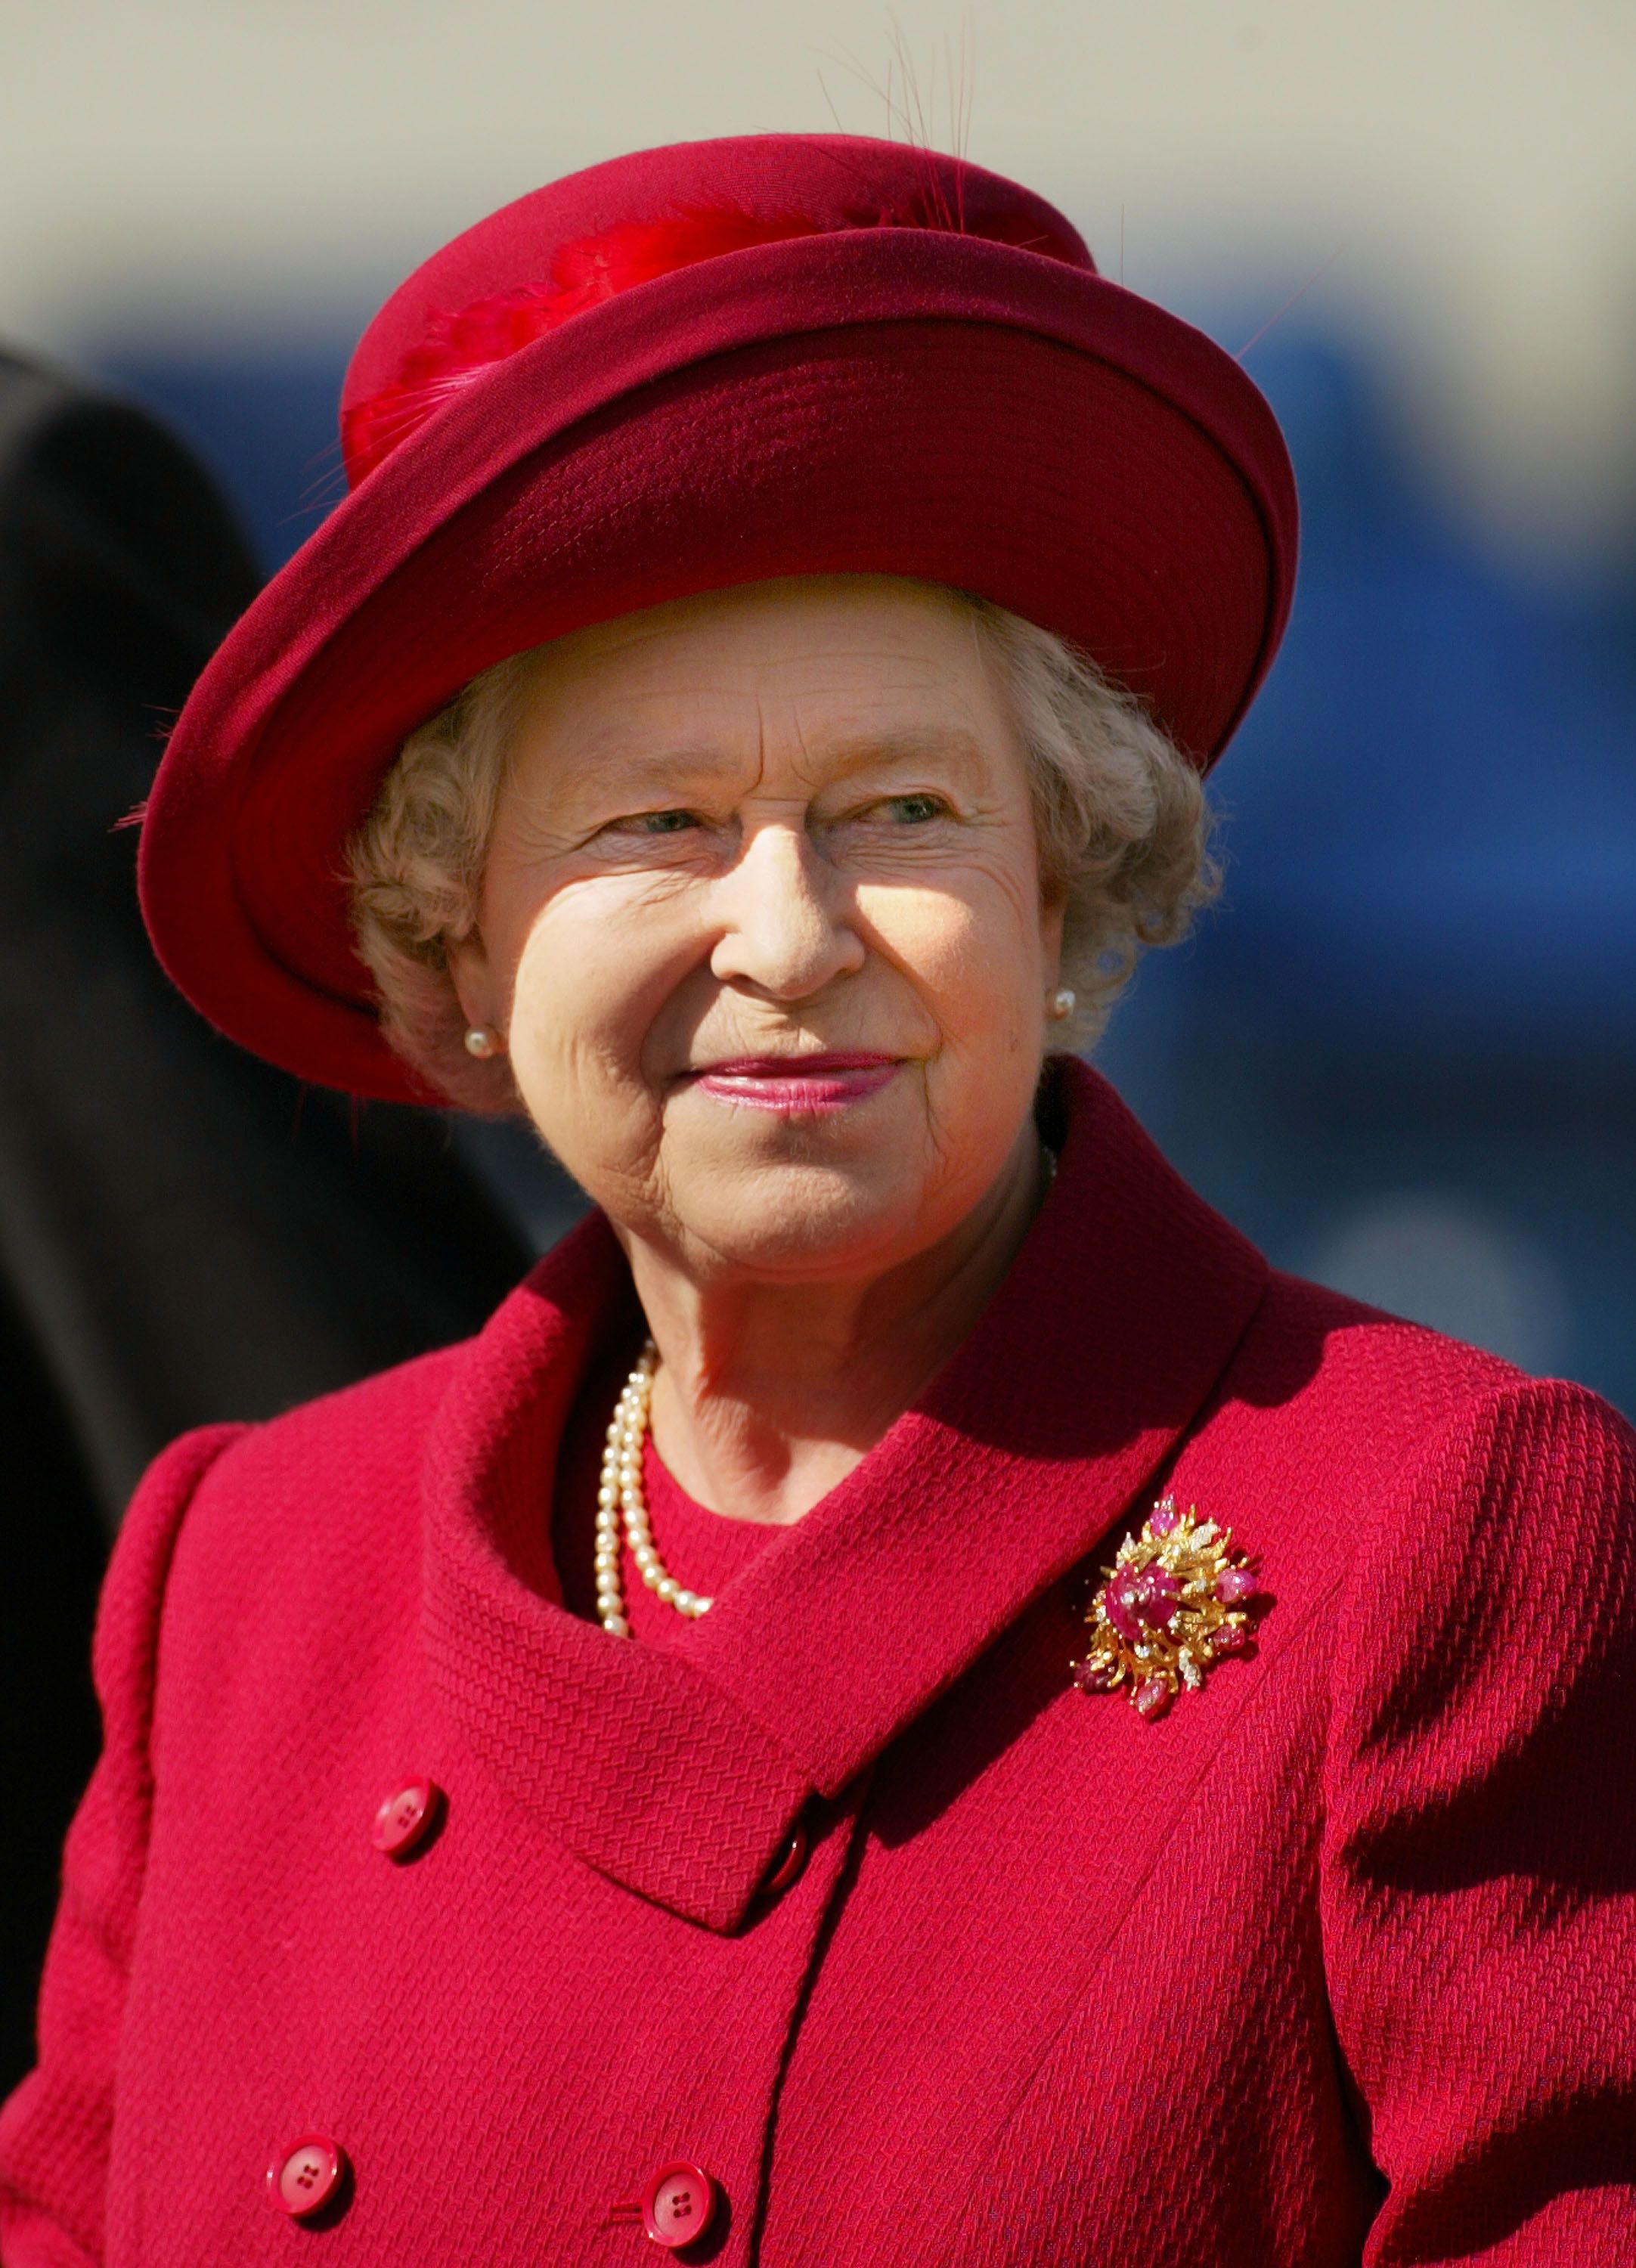 Queen Elizabeth smiles May 18, 2002 after presenting a trophy for the "best turned out trooper" to a Household Cavalry soldier at The Royal Windsor Horse Show at Windsor Great Park, England | Photo: Getty Images